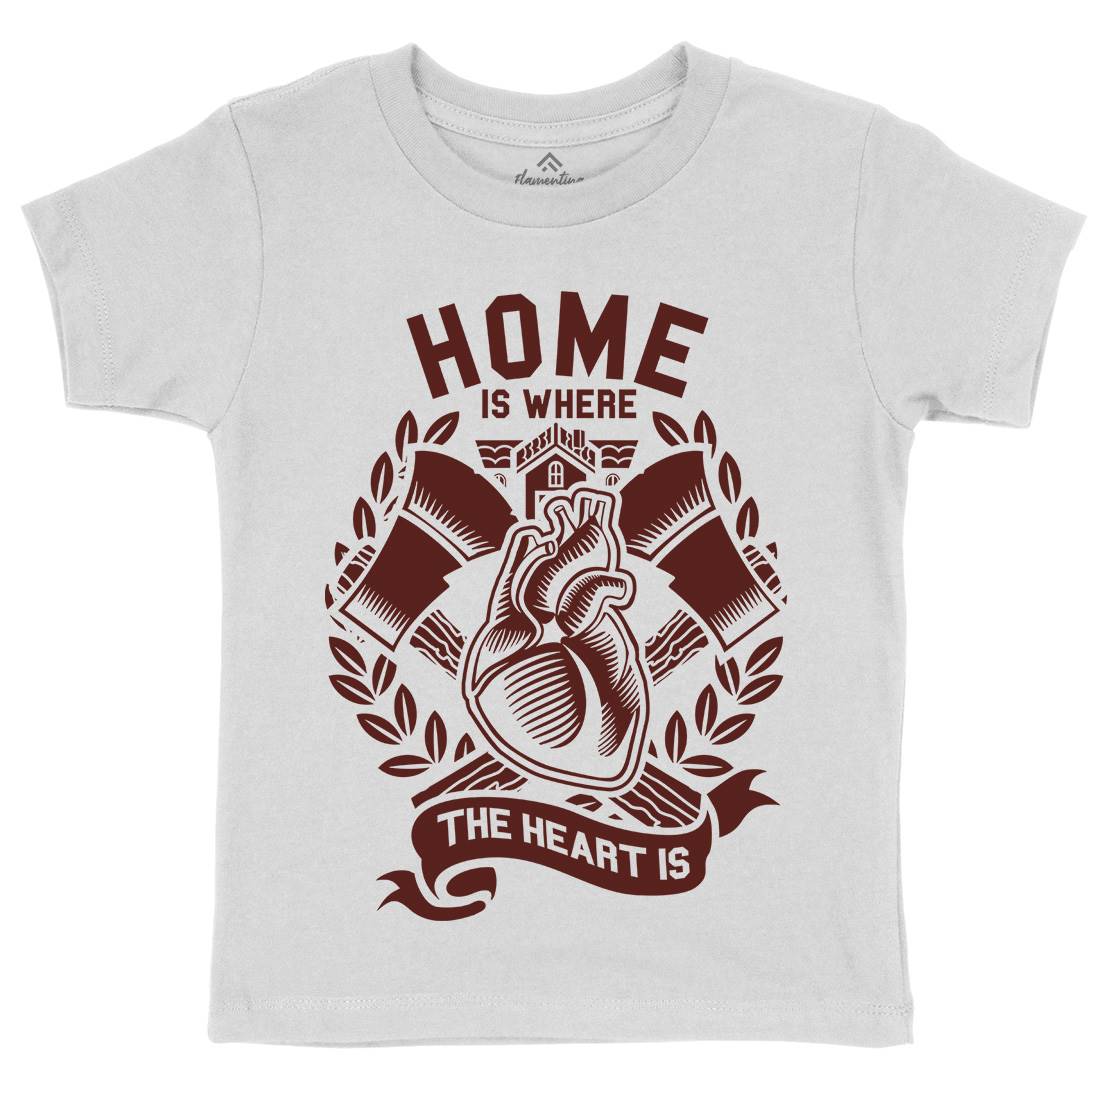 Home Kids Organic Crew Neck T-Shirt Quotes A241